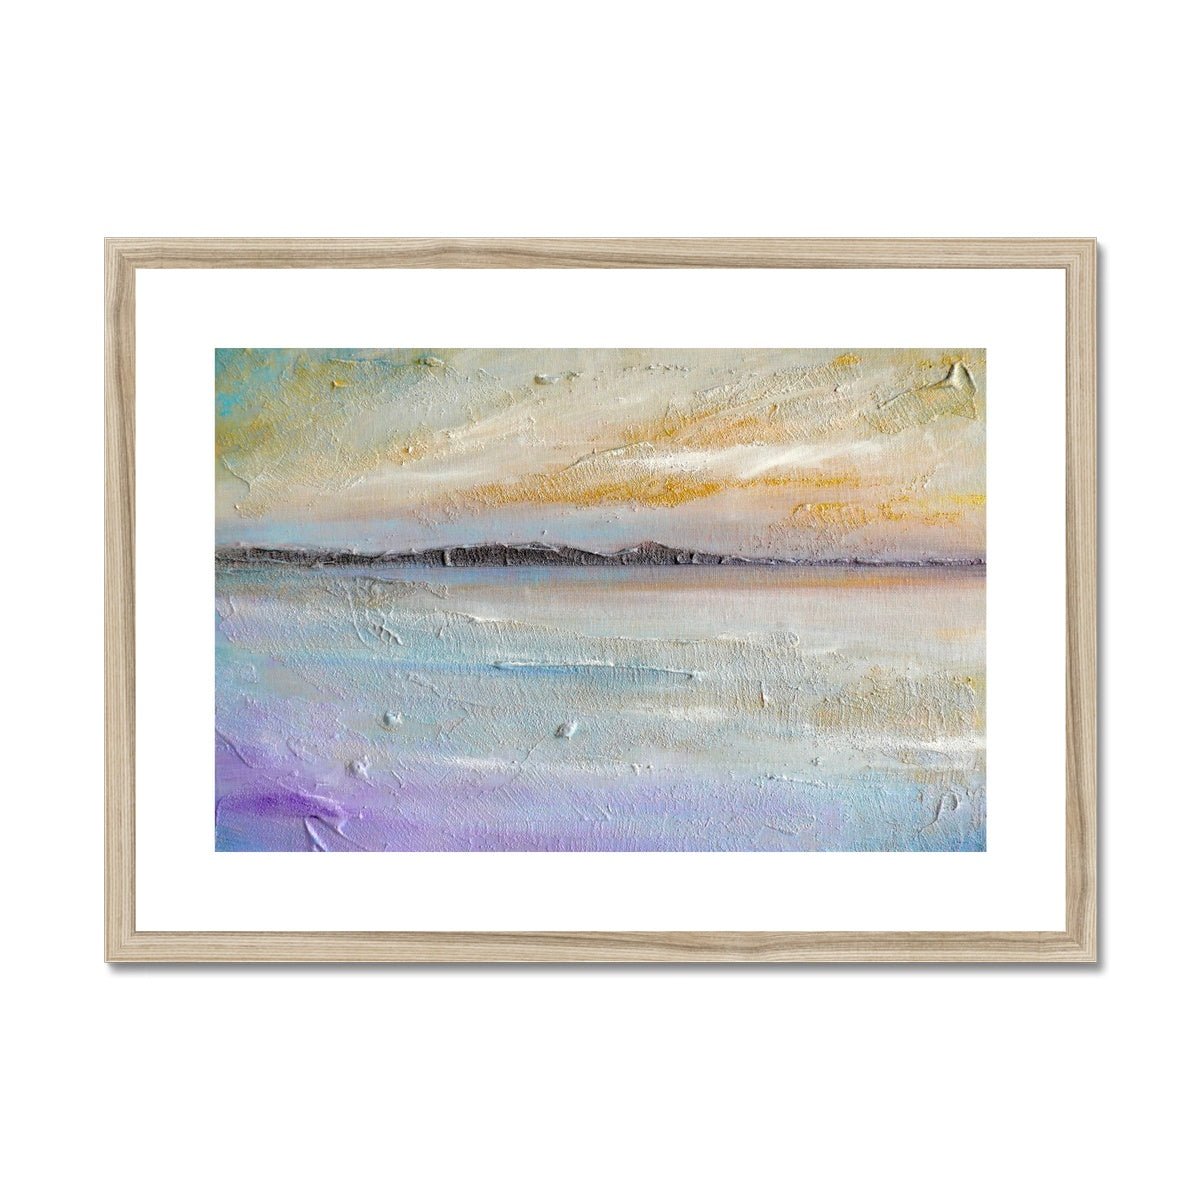 Sollas Beach North Uist Painting | Framed & Mounted Prints From Scotland-Framed & Mounted Prints-Hebridean Islands Art Gallery-A2 Landscape-Natural Frame-Paintings, Prints, Homeware, Art Gifts From Scotland By Scottish Artist Kevin Hunter